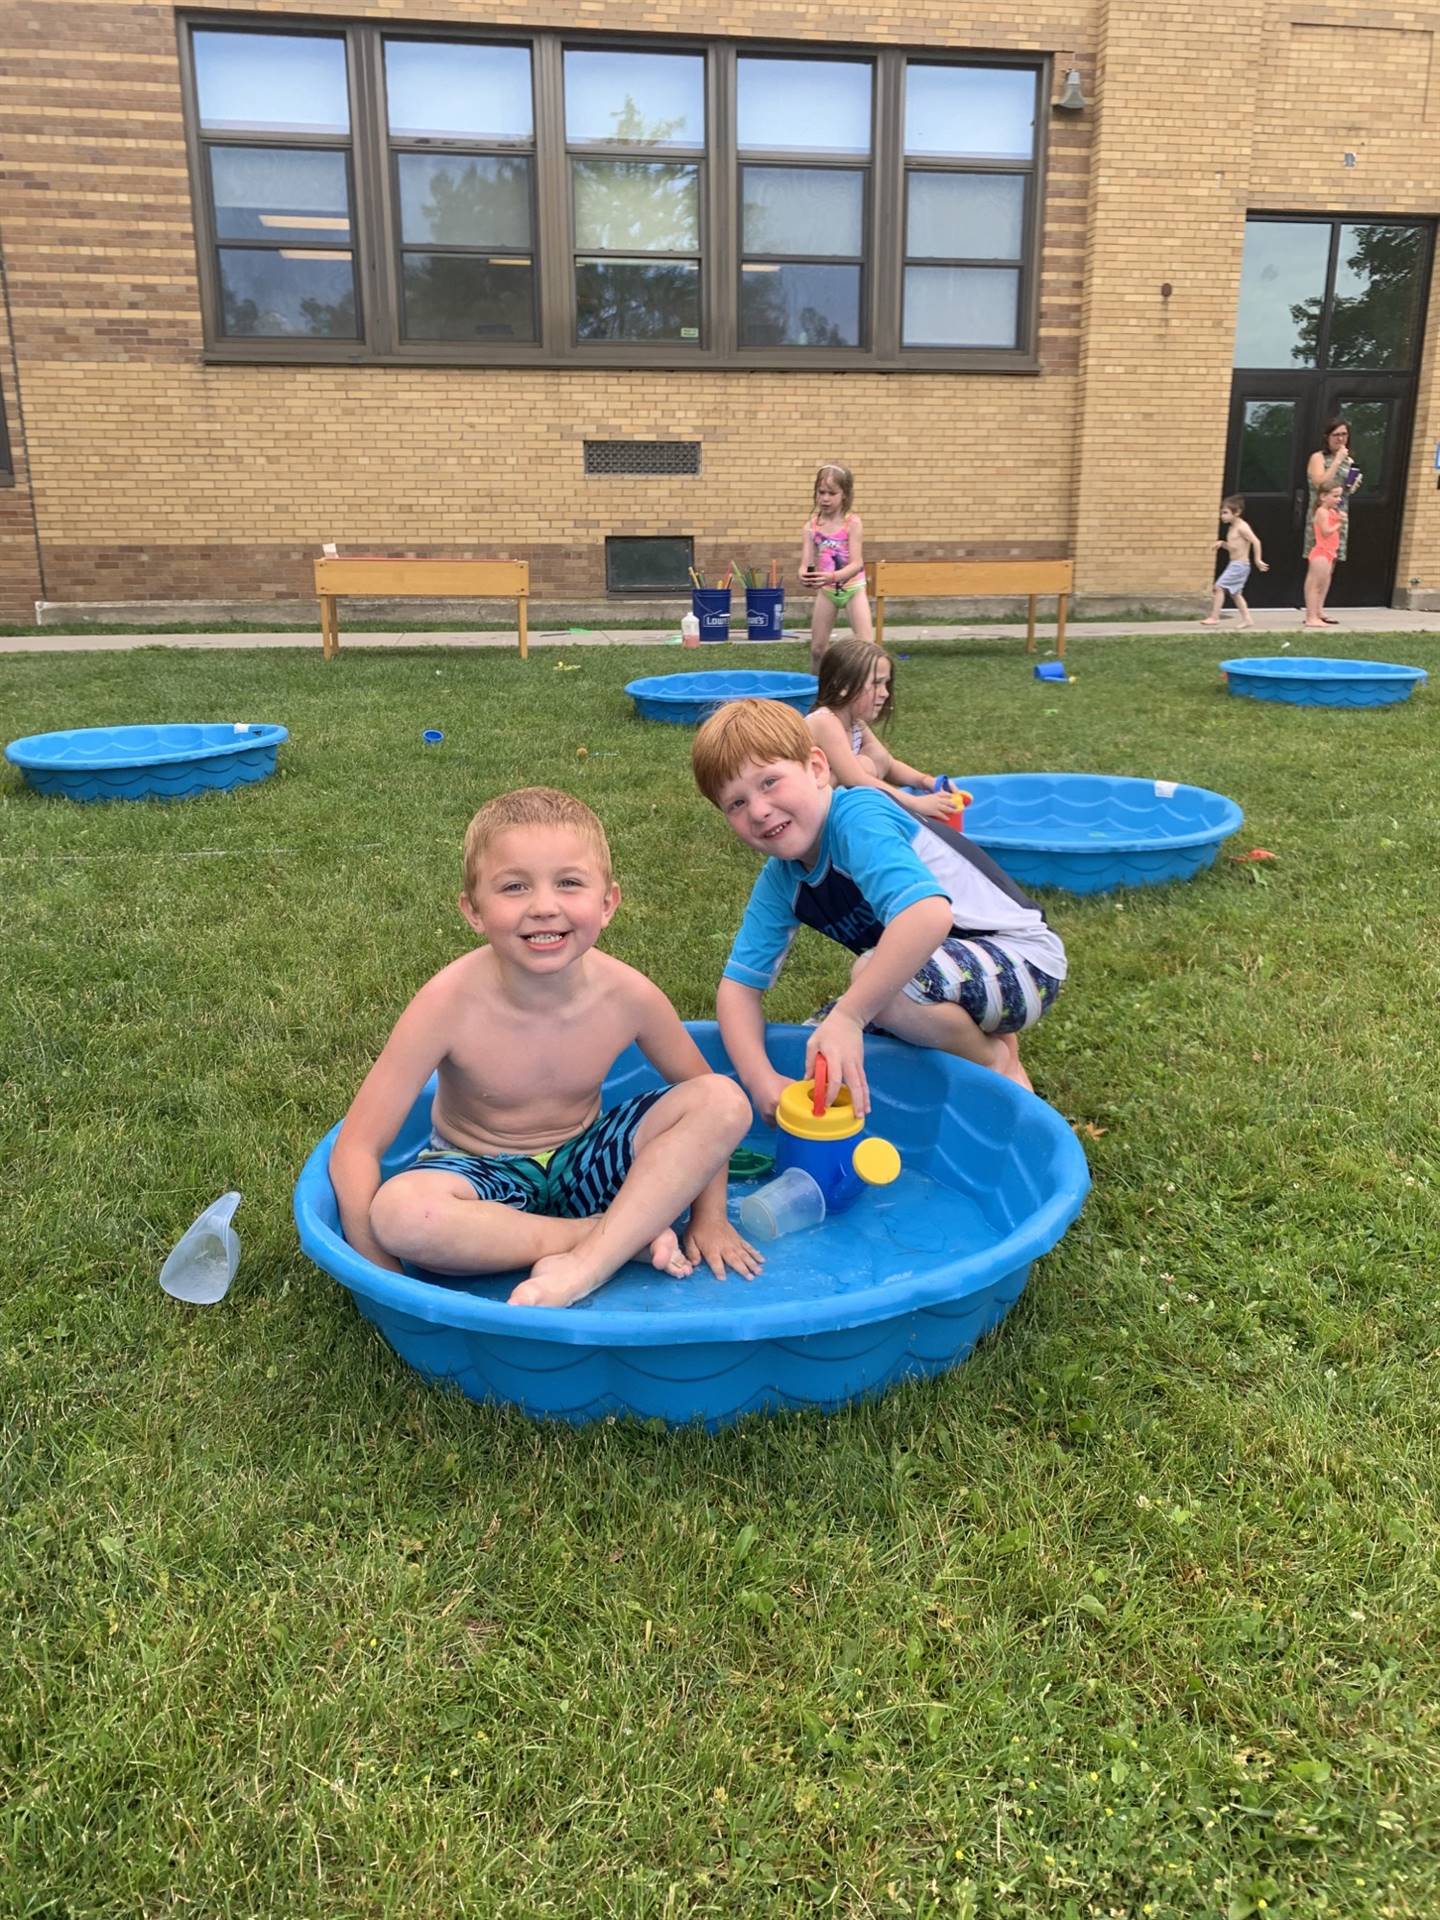 2 students playing in a wading pool